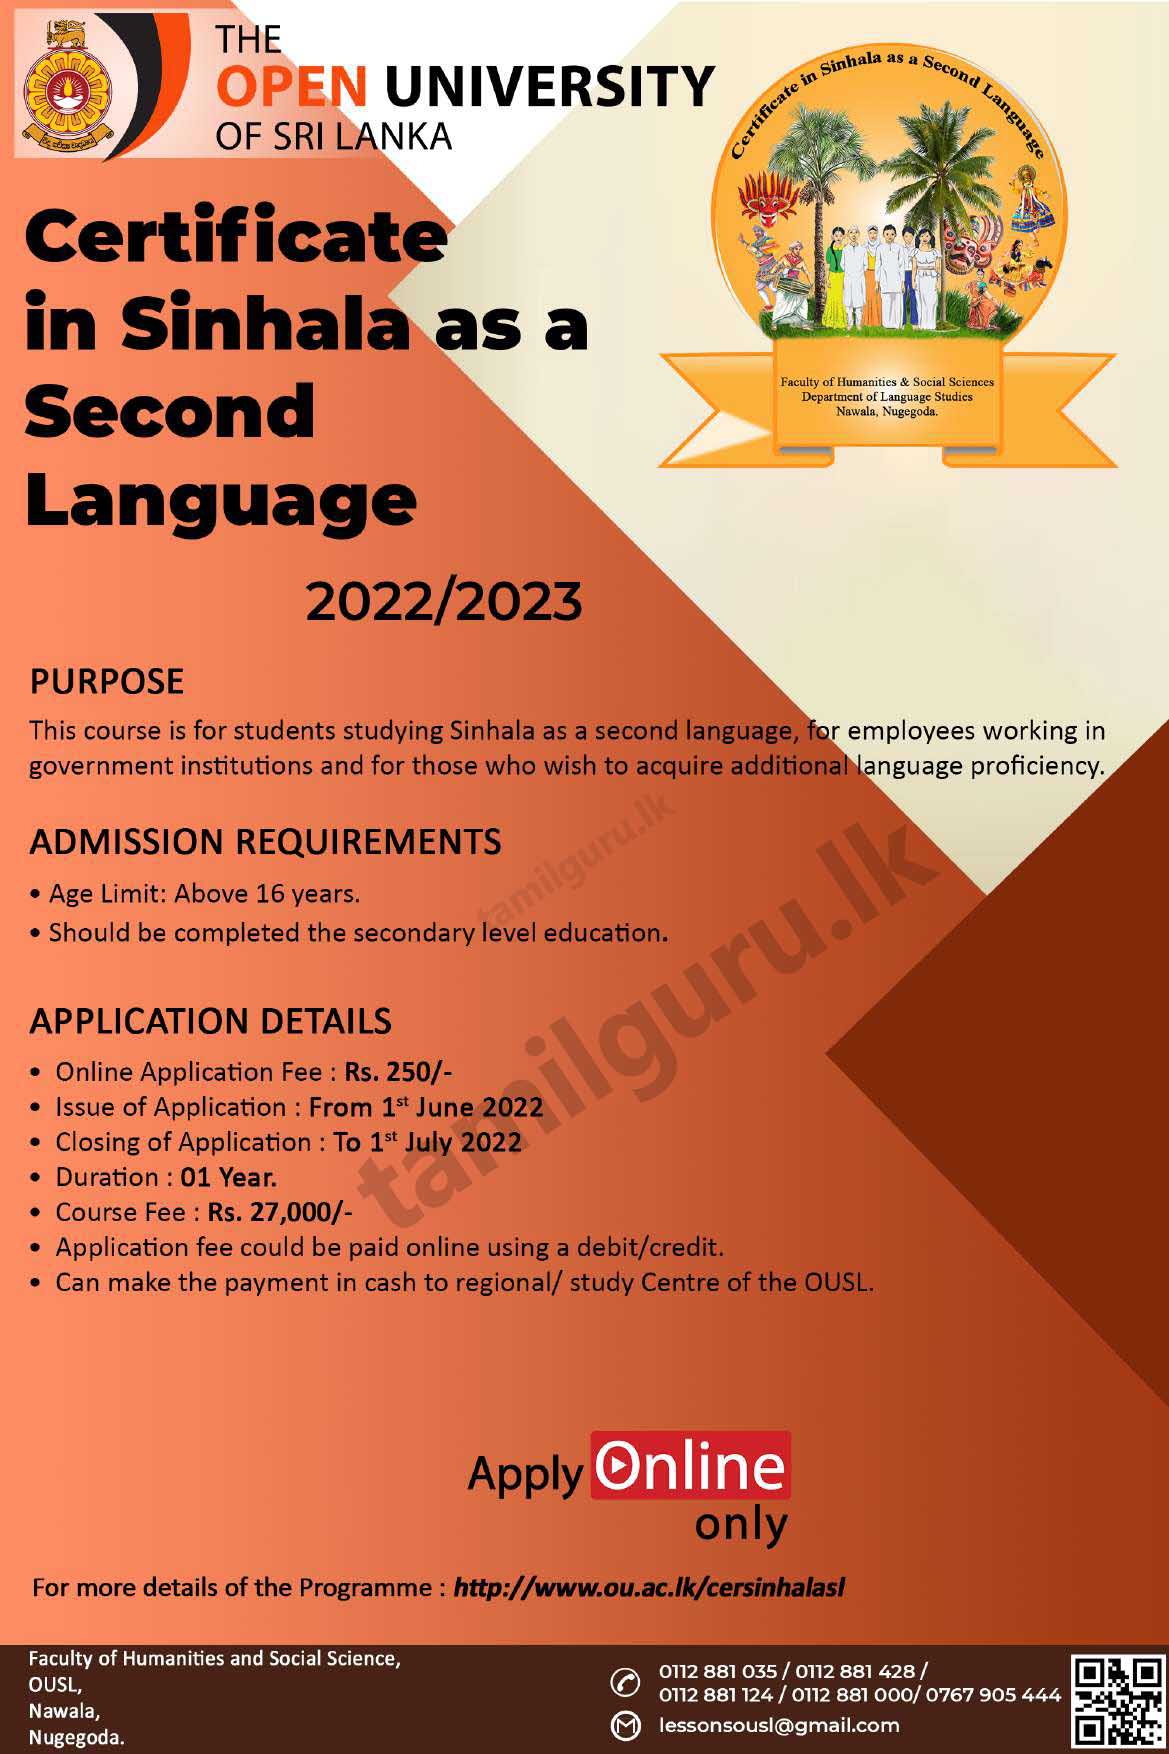 Certificate in Sinhala as a Second Language Course 2022/2023 - The Open University of Sri Lanka (OUSL)